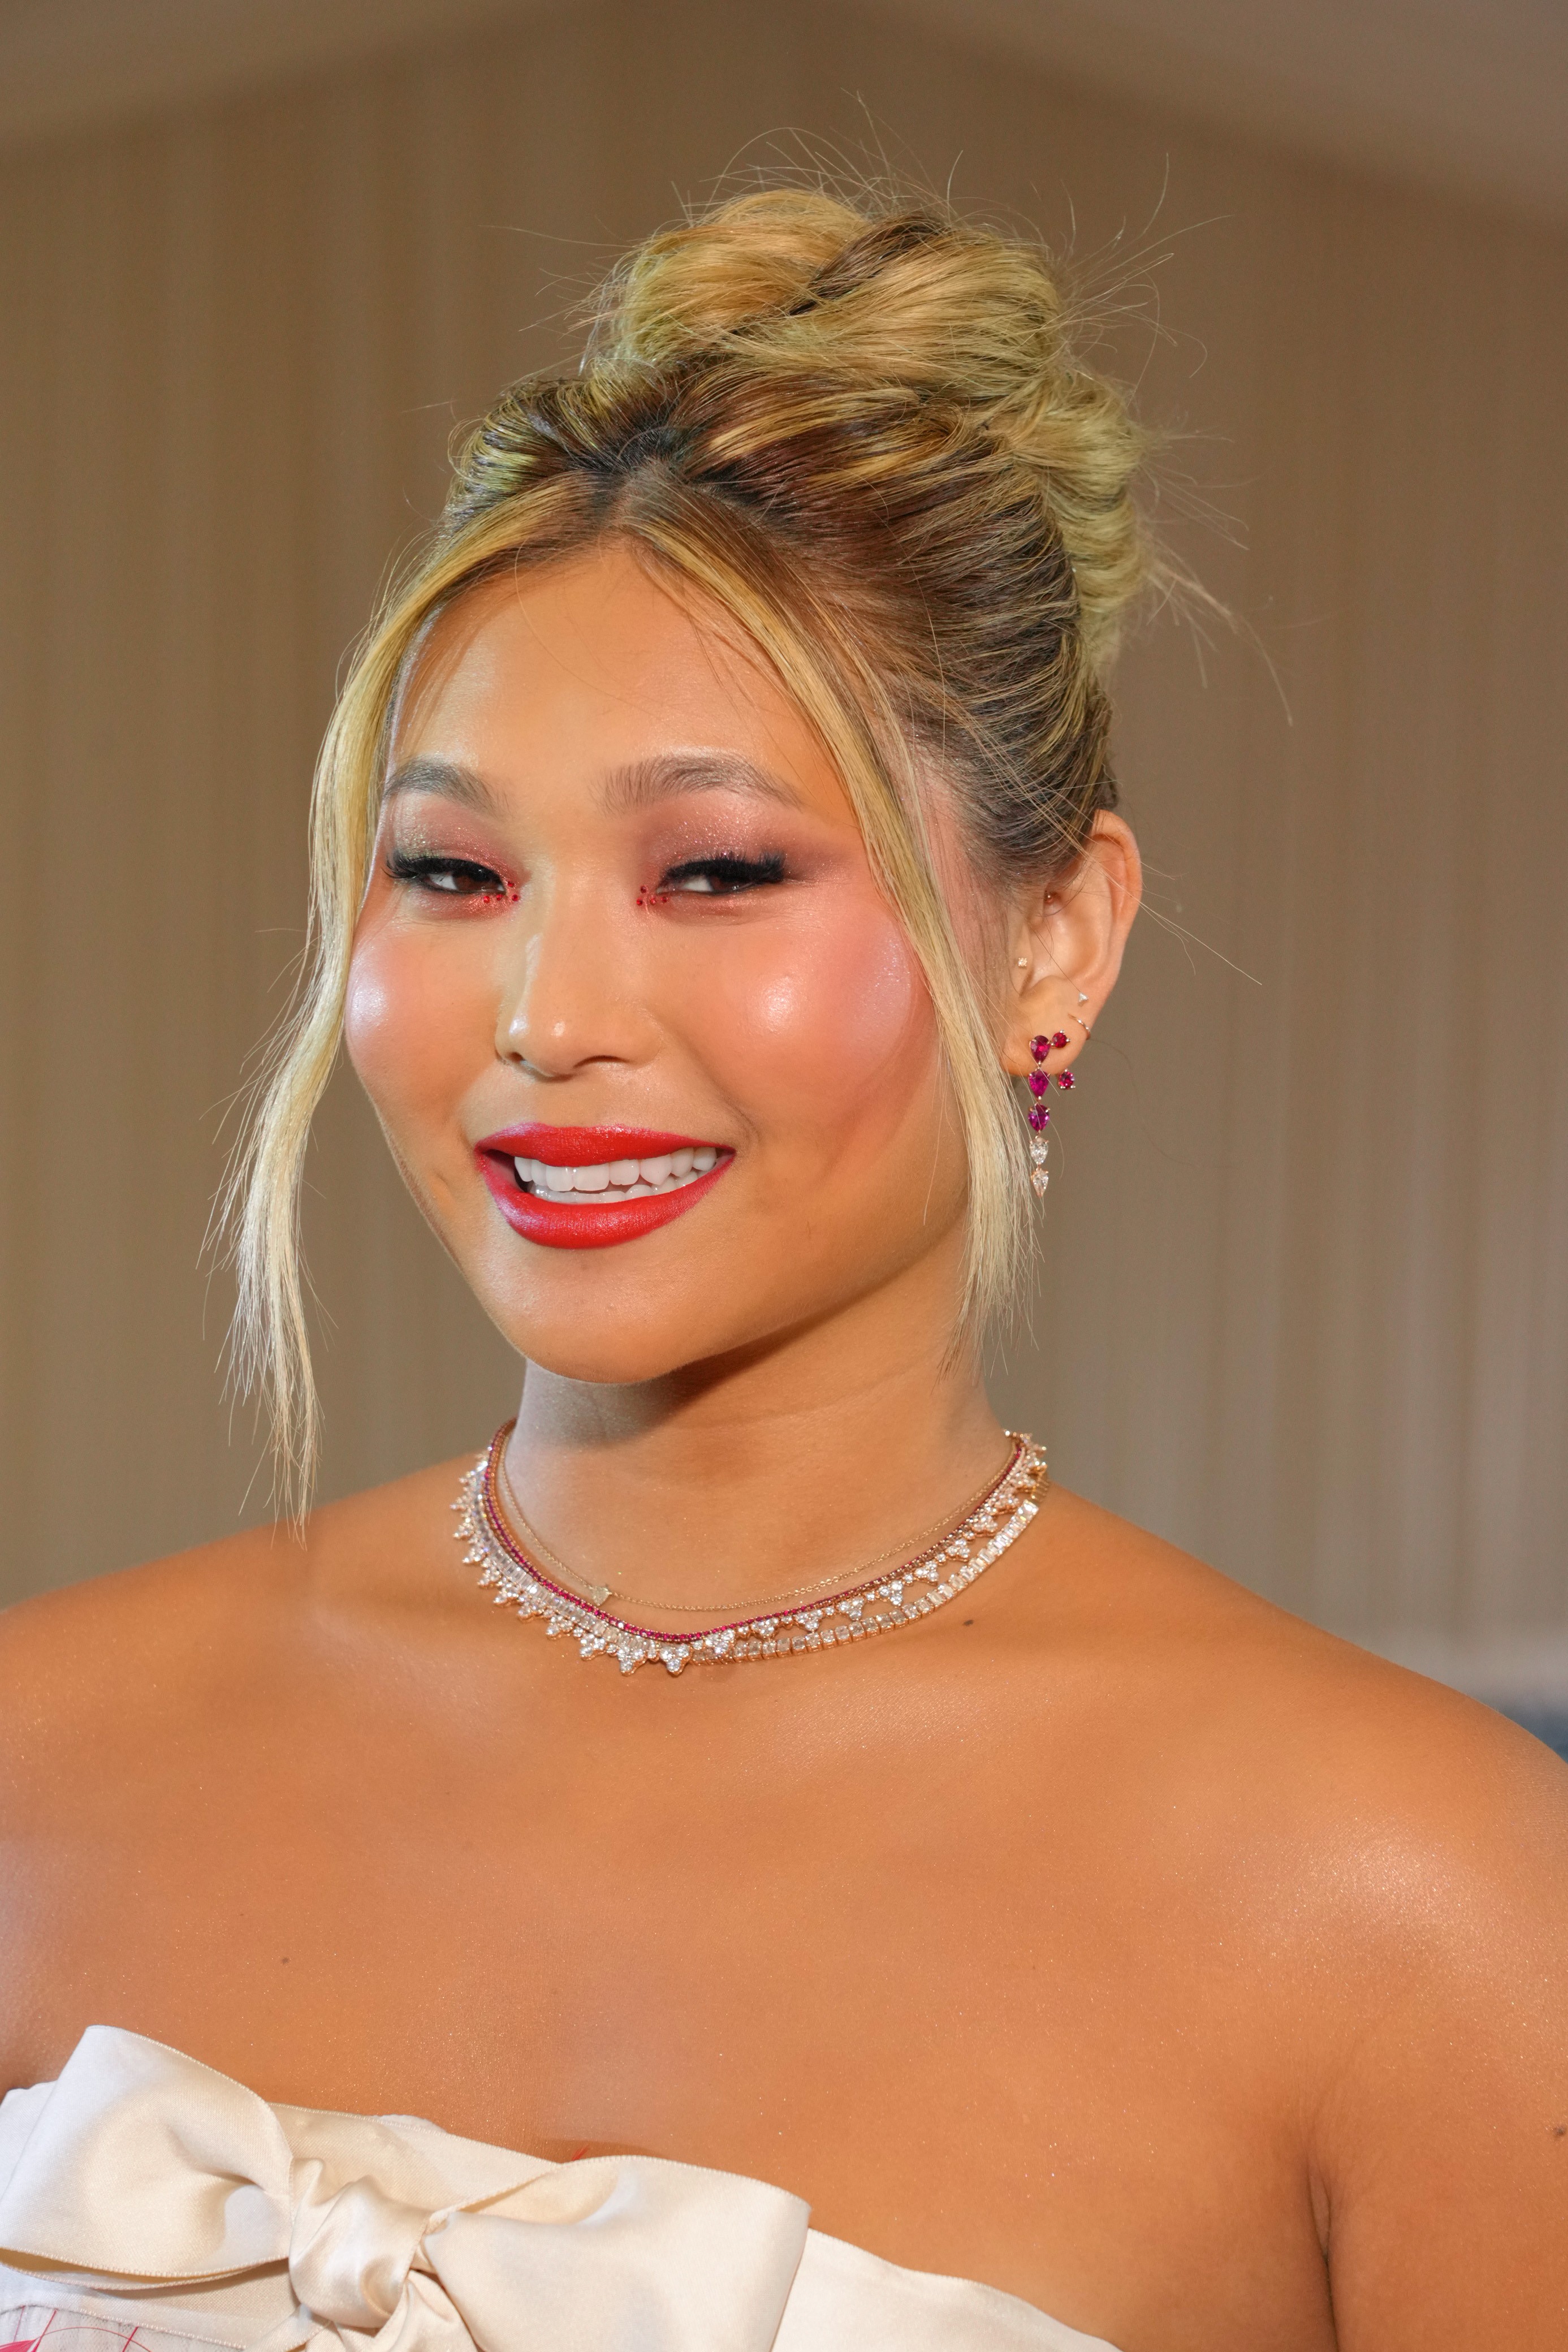 NEW YORK, NEW YORK - MAY 02: (Exclusive Coverage) Chloe Kim arrives at The 2022 Met Gala Celebrating "In America: An Anthology of Fashion" at The Metropolitan Museum of Art on May 02, 2022 in New York City. (Photo by Kevin Mazur/MG22/Getty Images for The  (Foto: Getty Images for The Met Museum/)